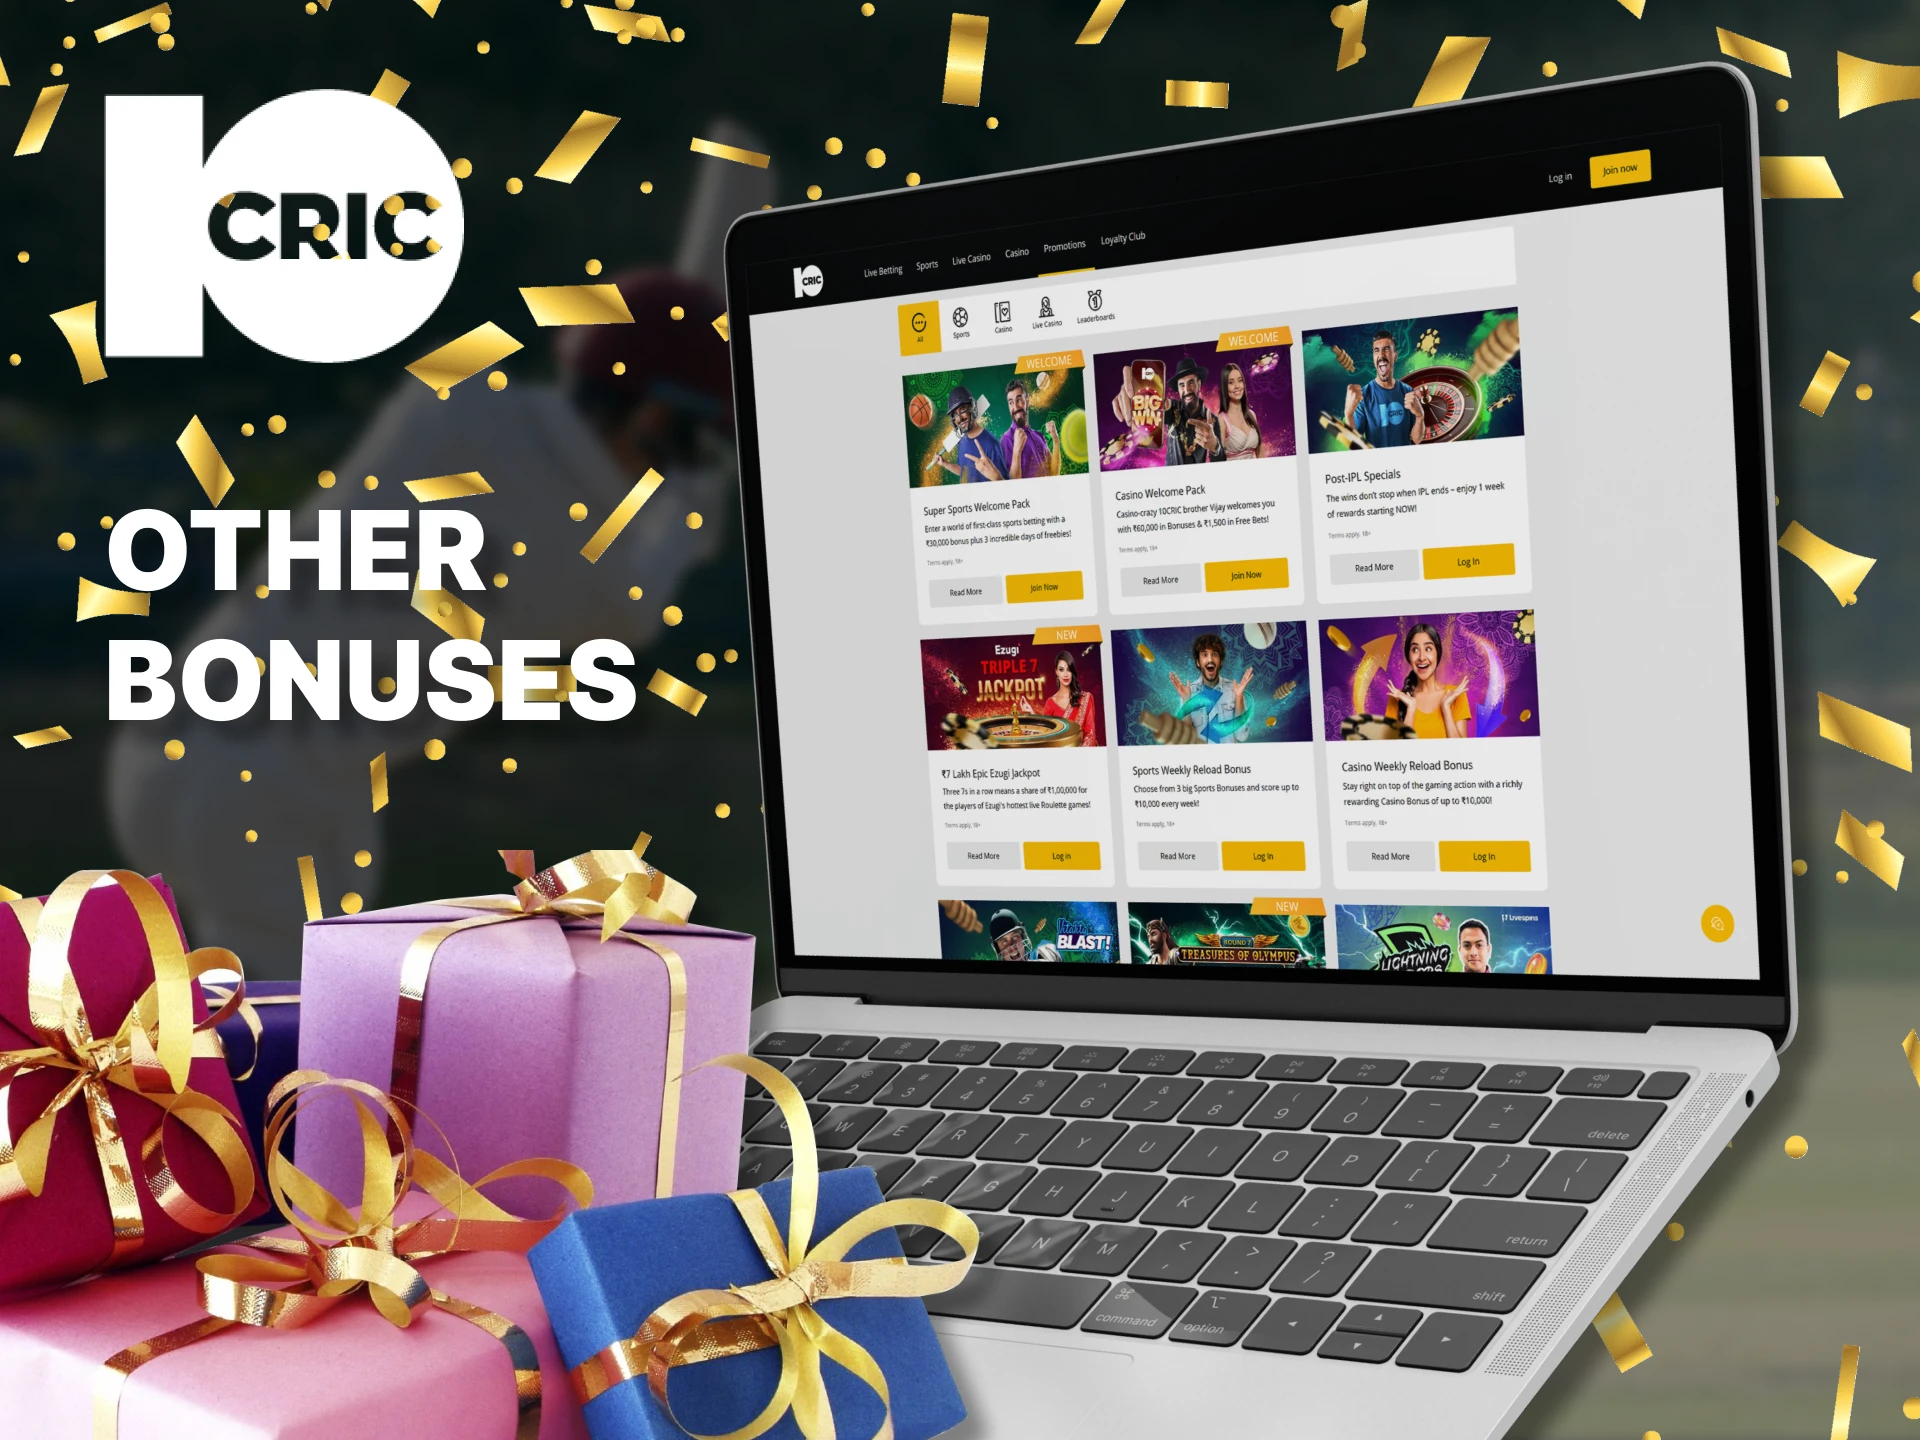 Learn more about other 10cric bonuses.